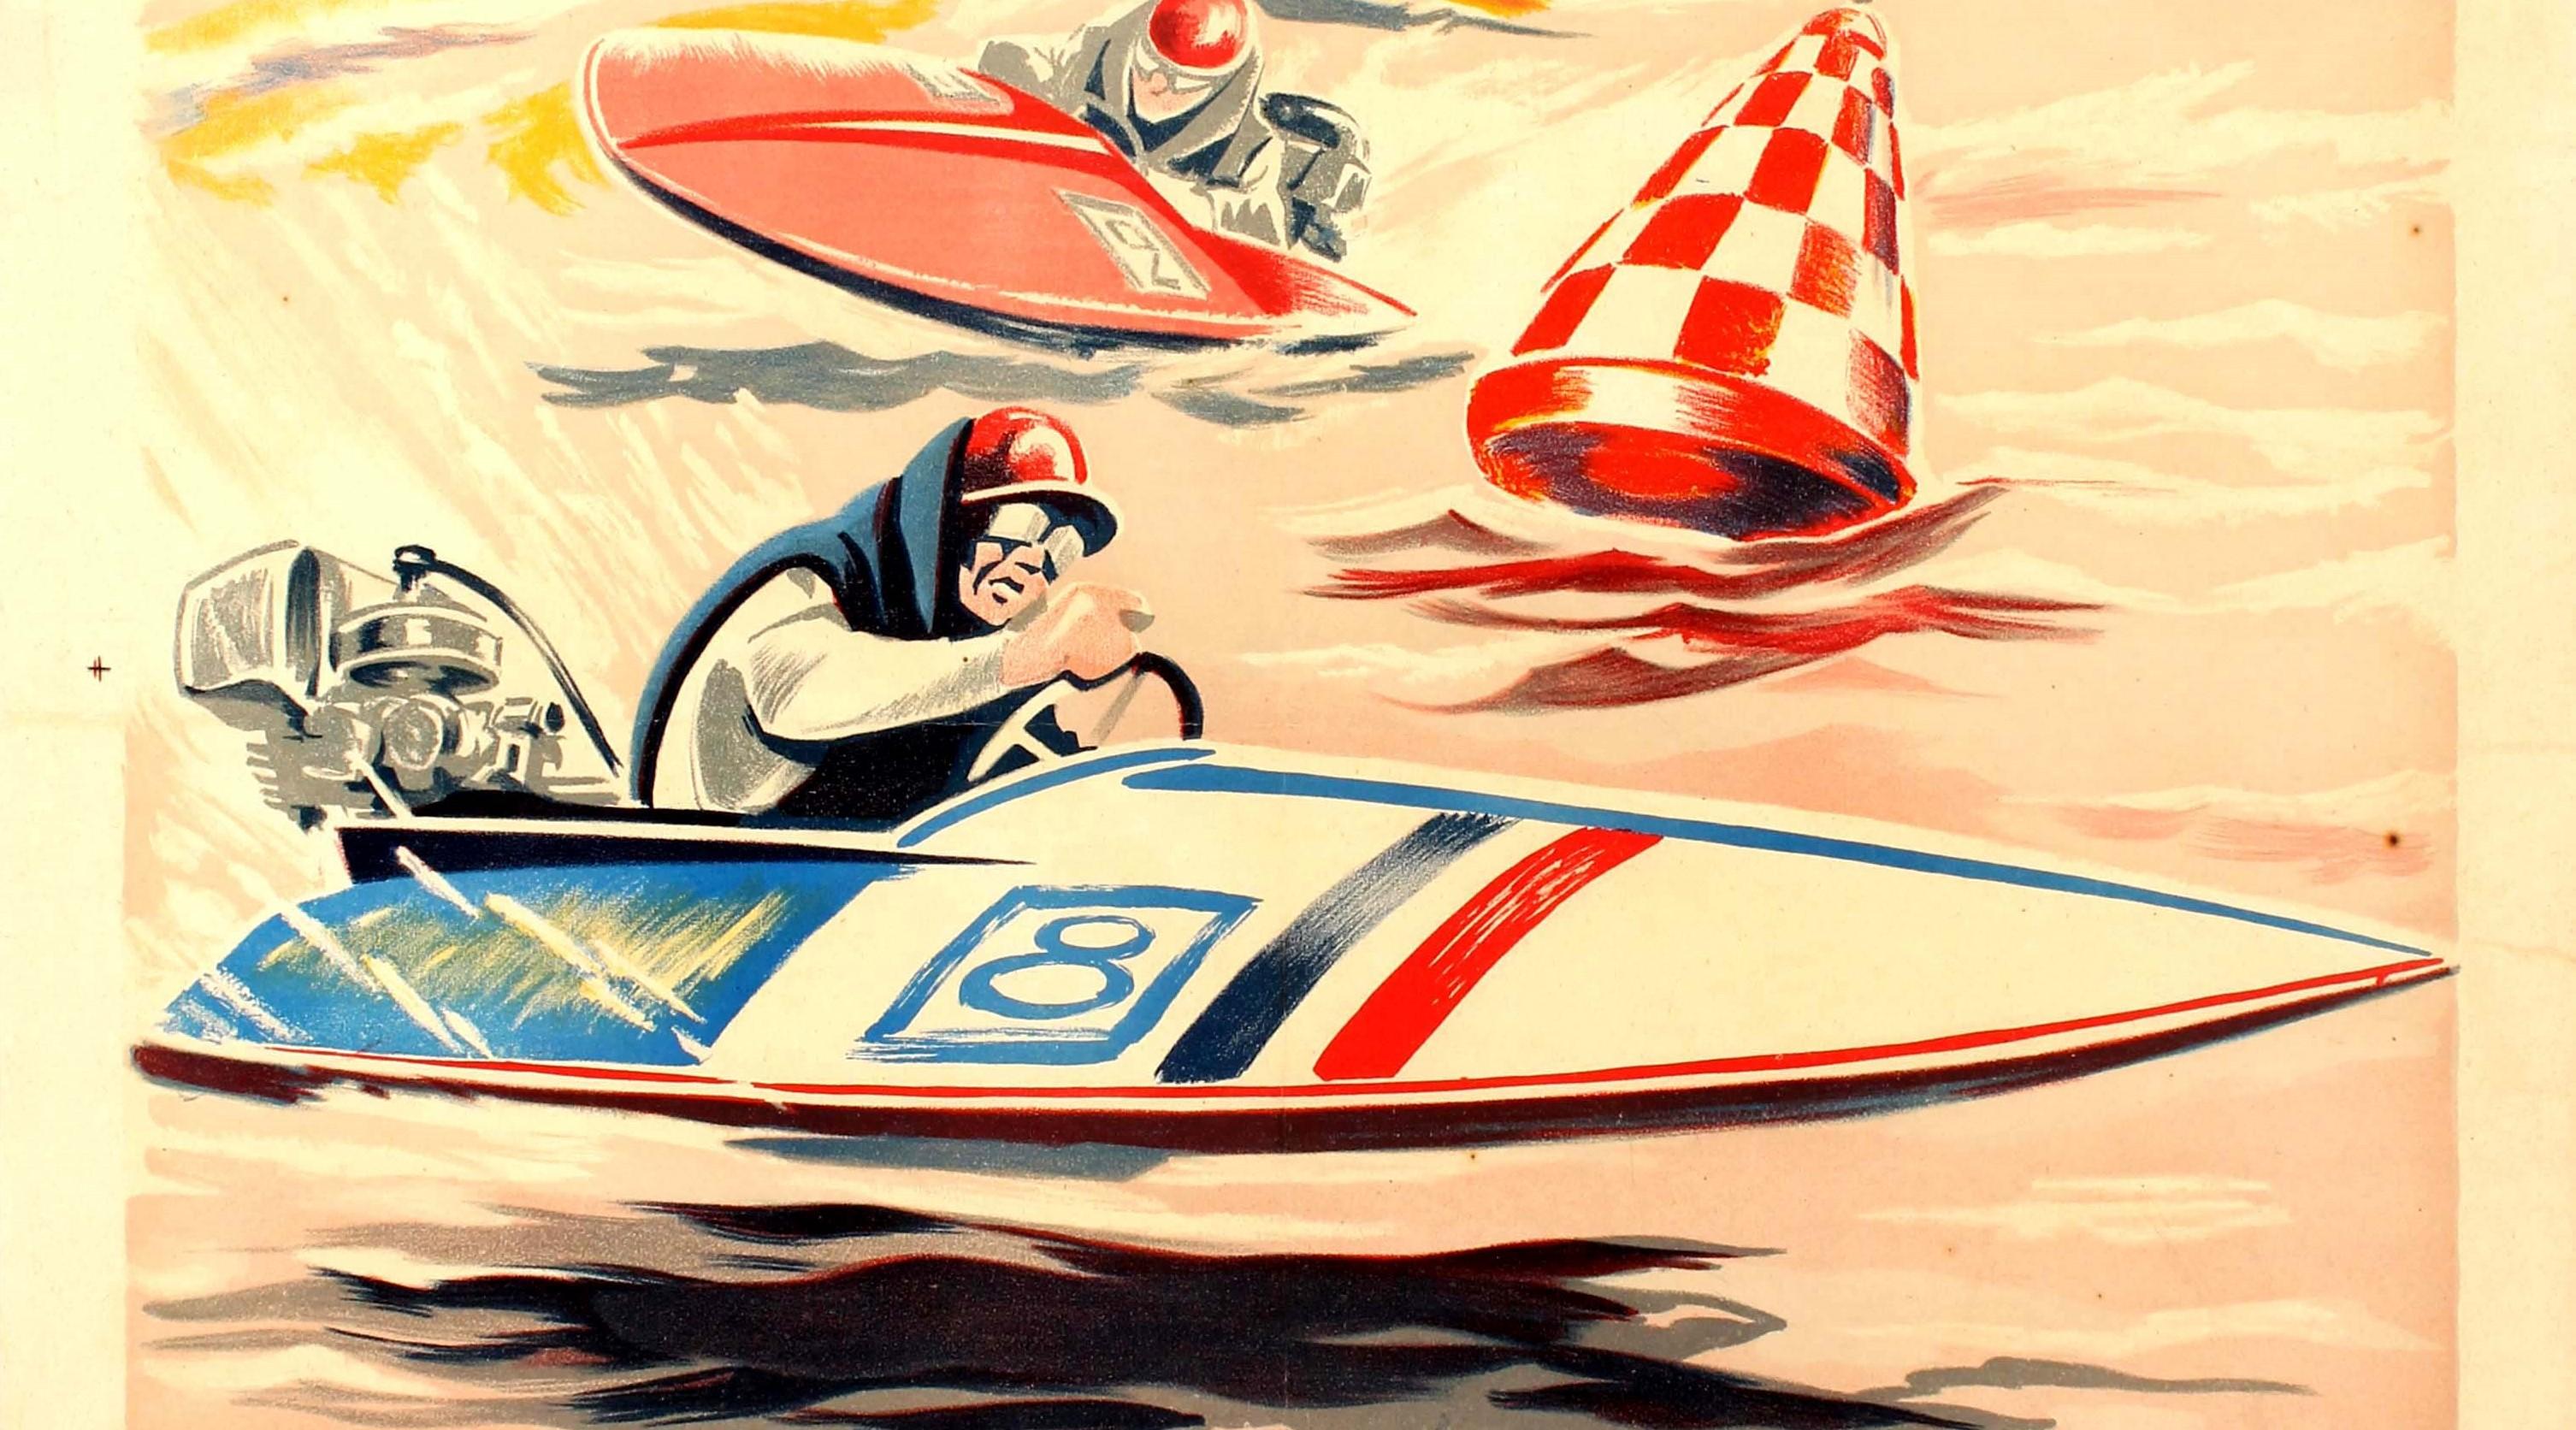 French Original Vintage Water Sport Poster for Grand Meeting International Motonautique For Sale